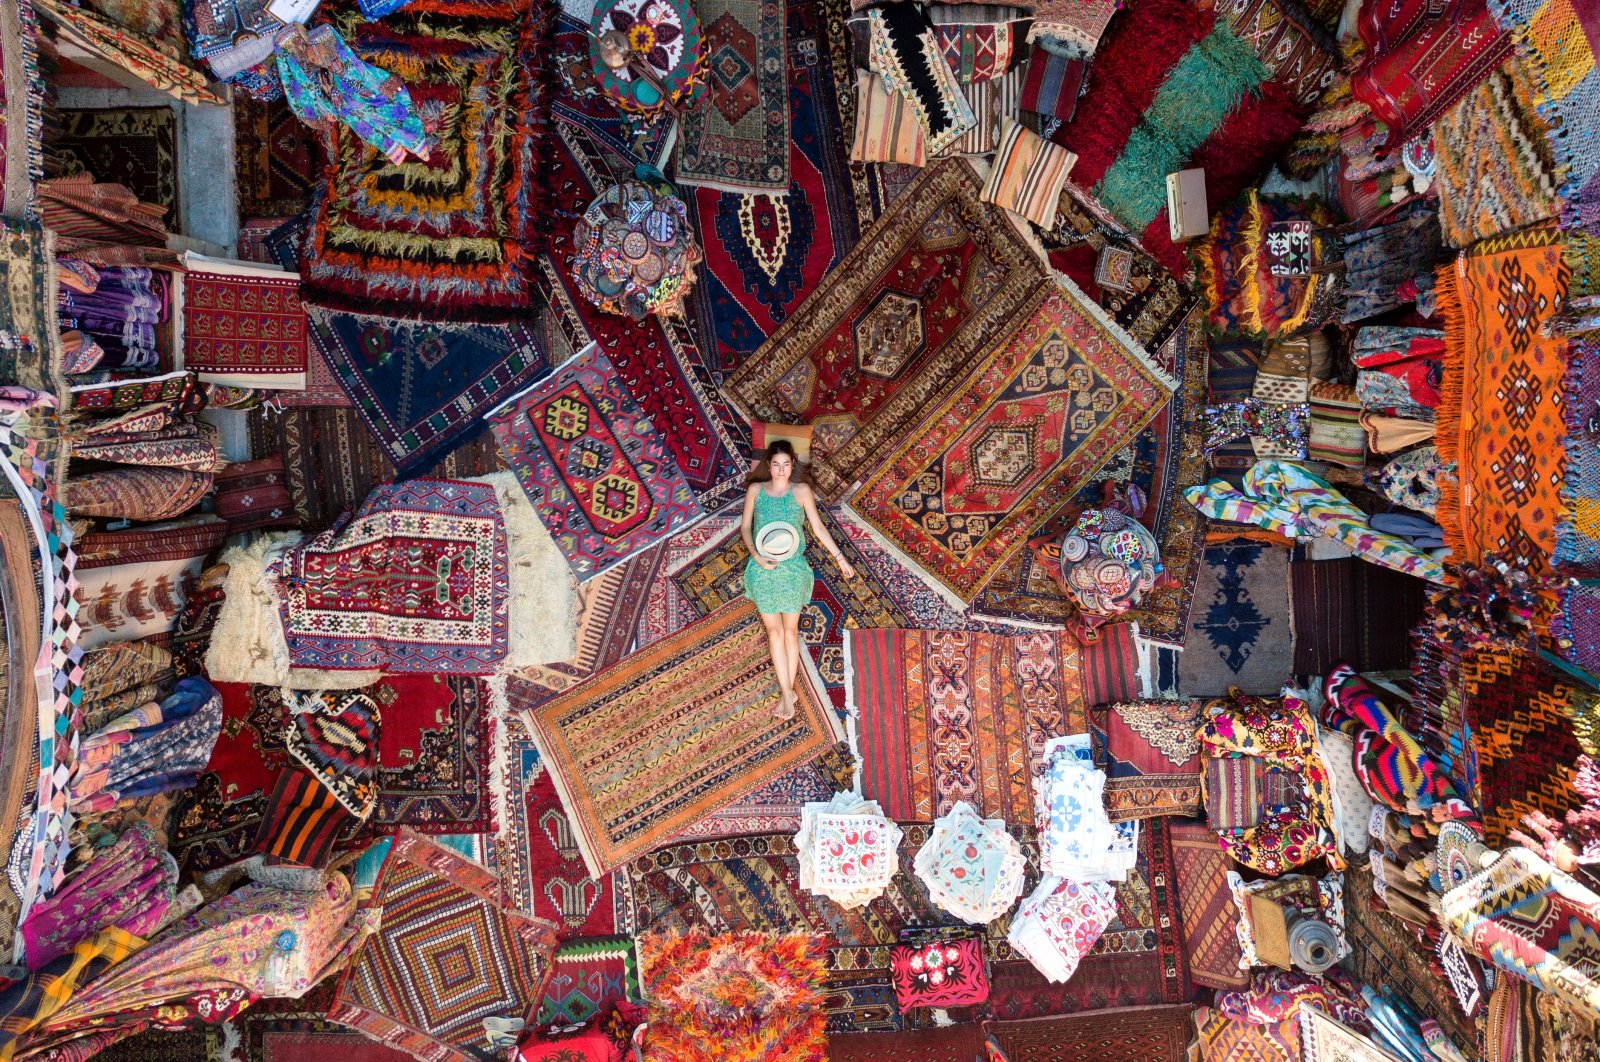 A tourist poses on hand-woven carpets in a historical inn converted into a carpet shop in Göreme, Nevşehir, central Turkey. (Getty Images) 